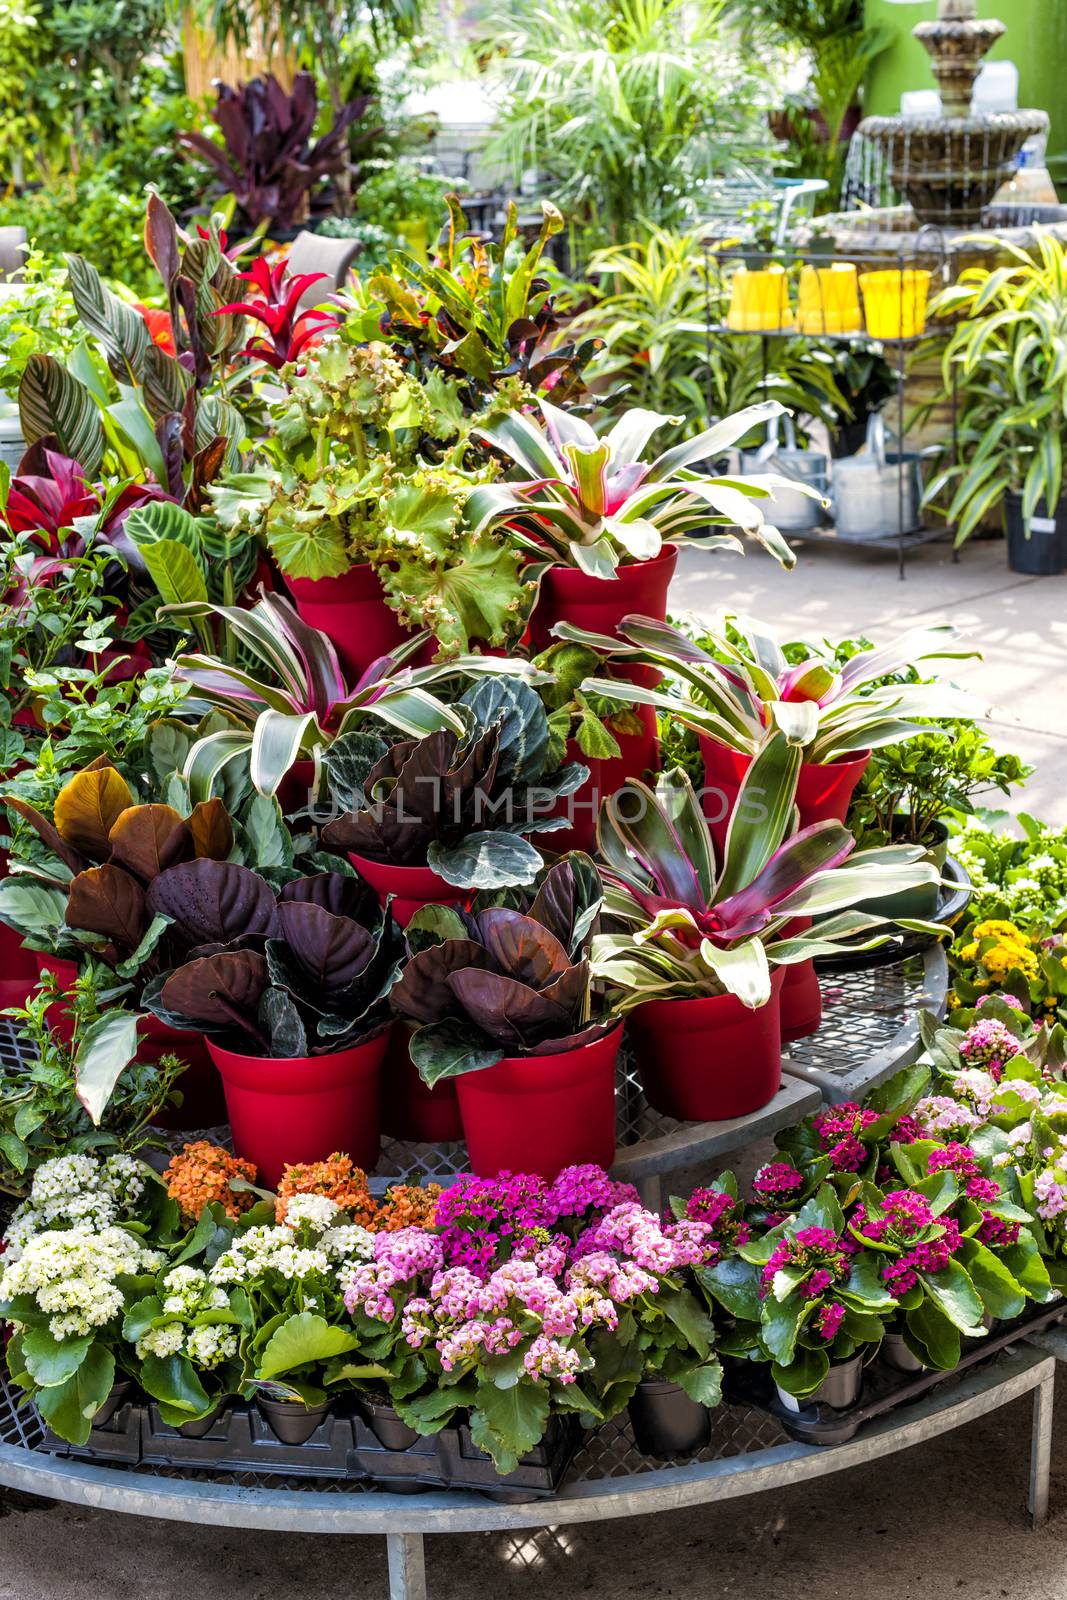 Plant nursery store with many plants for sale on display rack